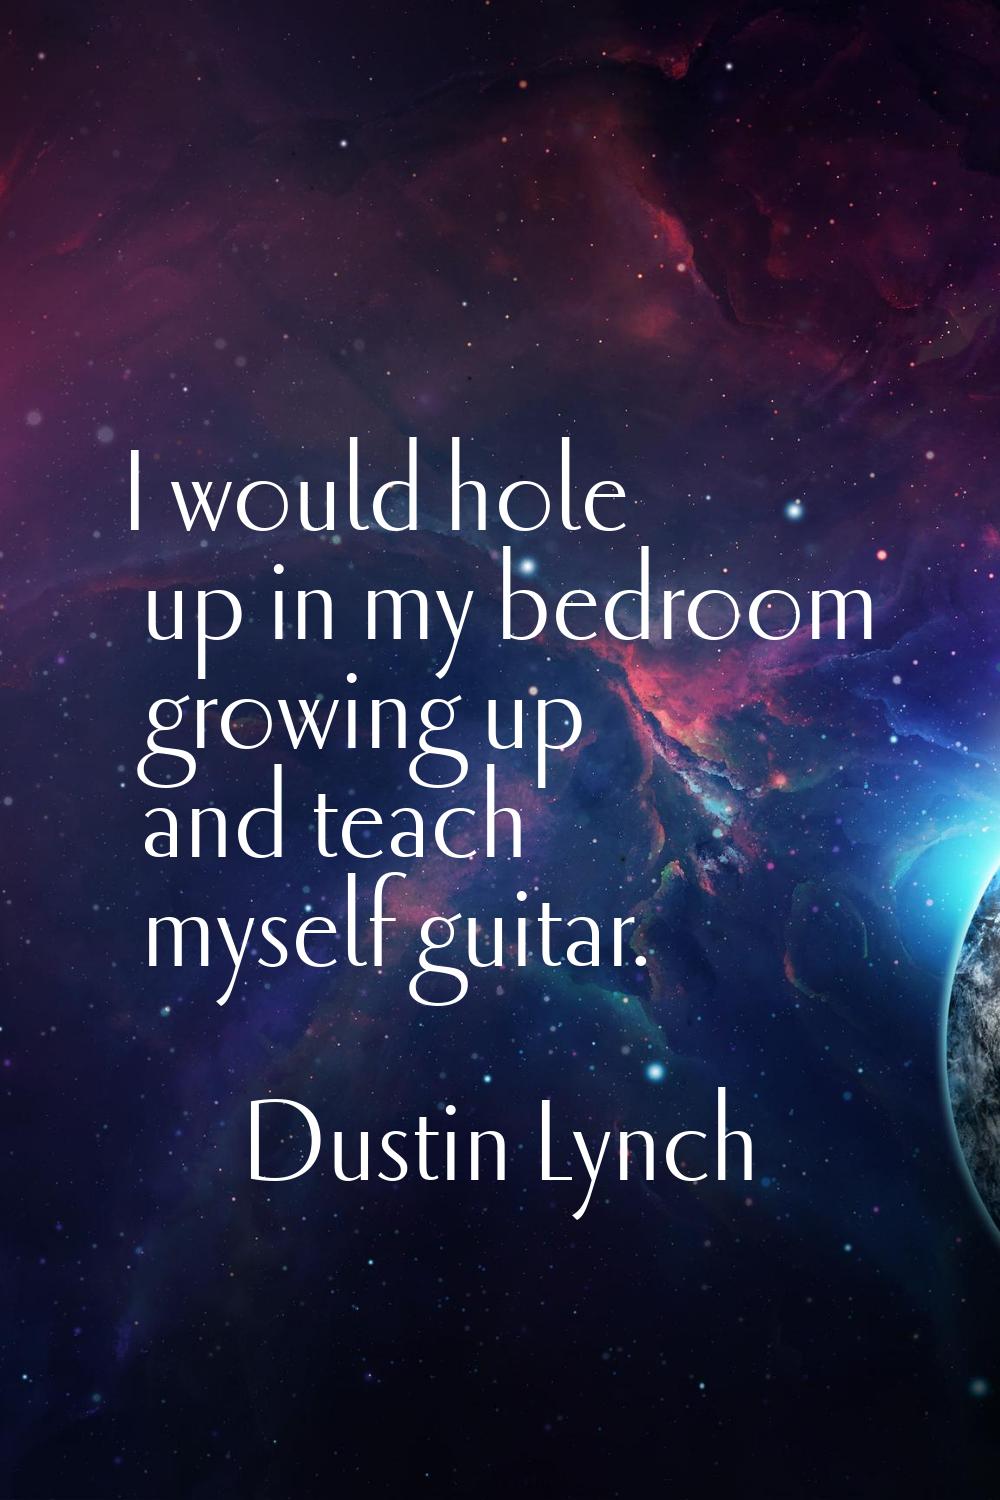 I would hole up in my bedroom growing up and teach myself guitar.